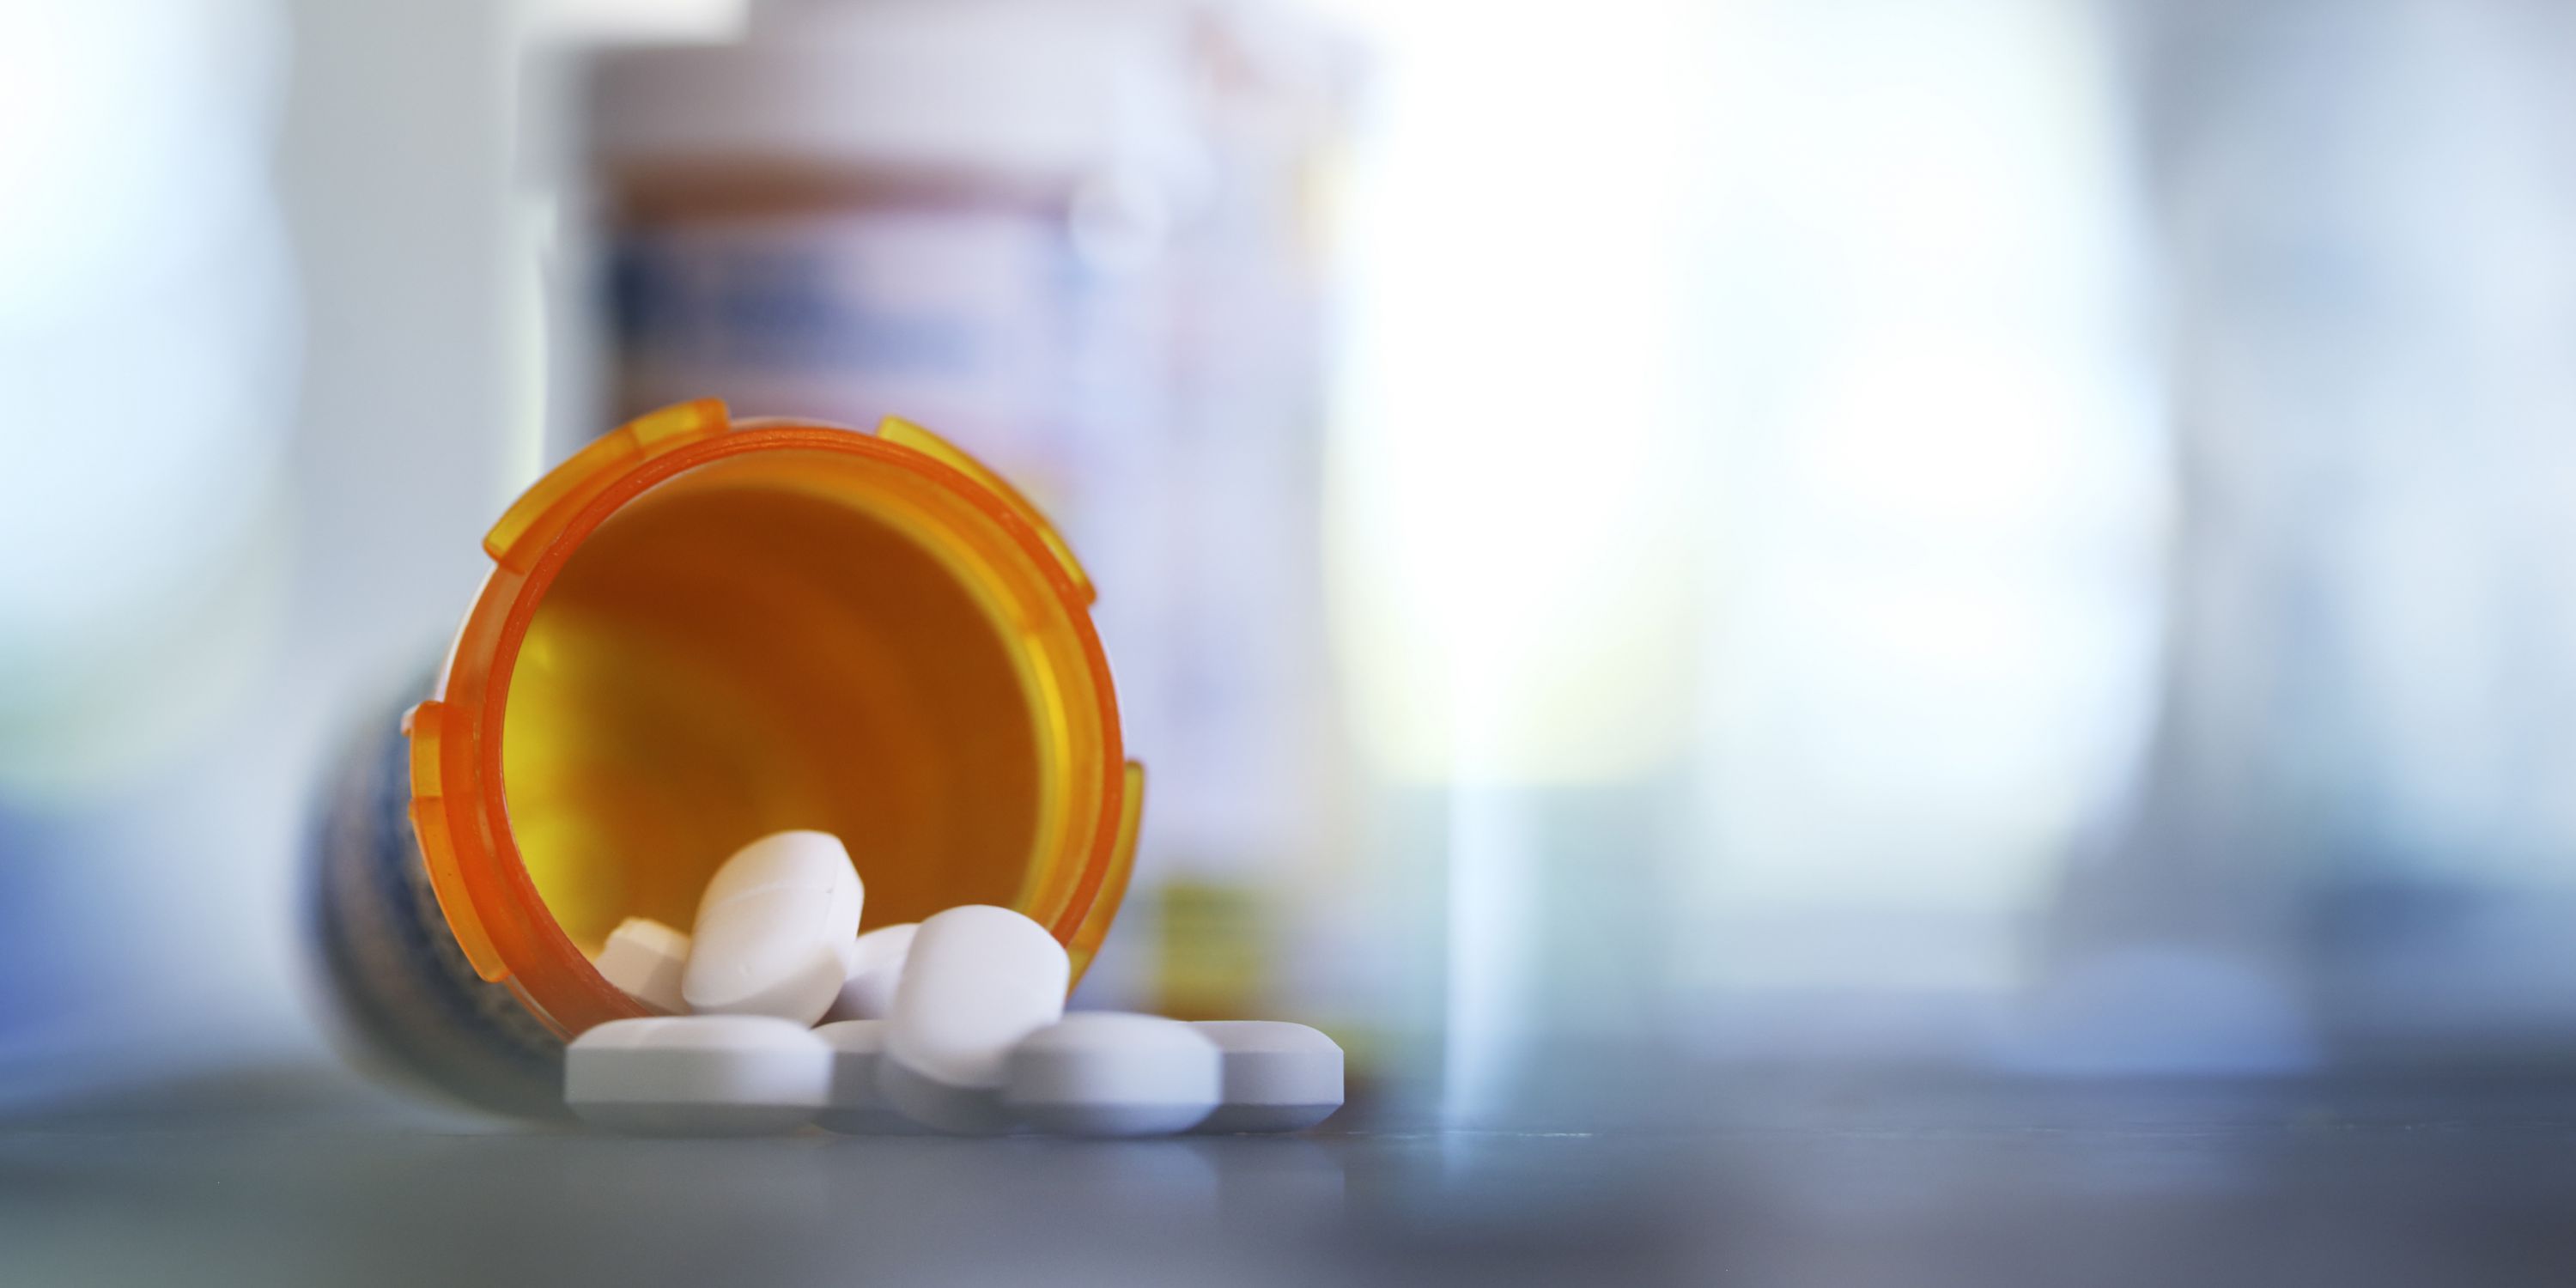 Top Targeted Medications and How to Protect Against Theft